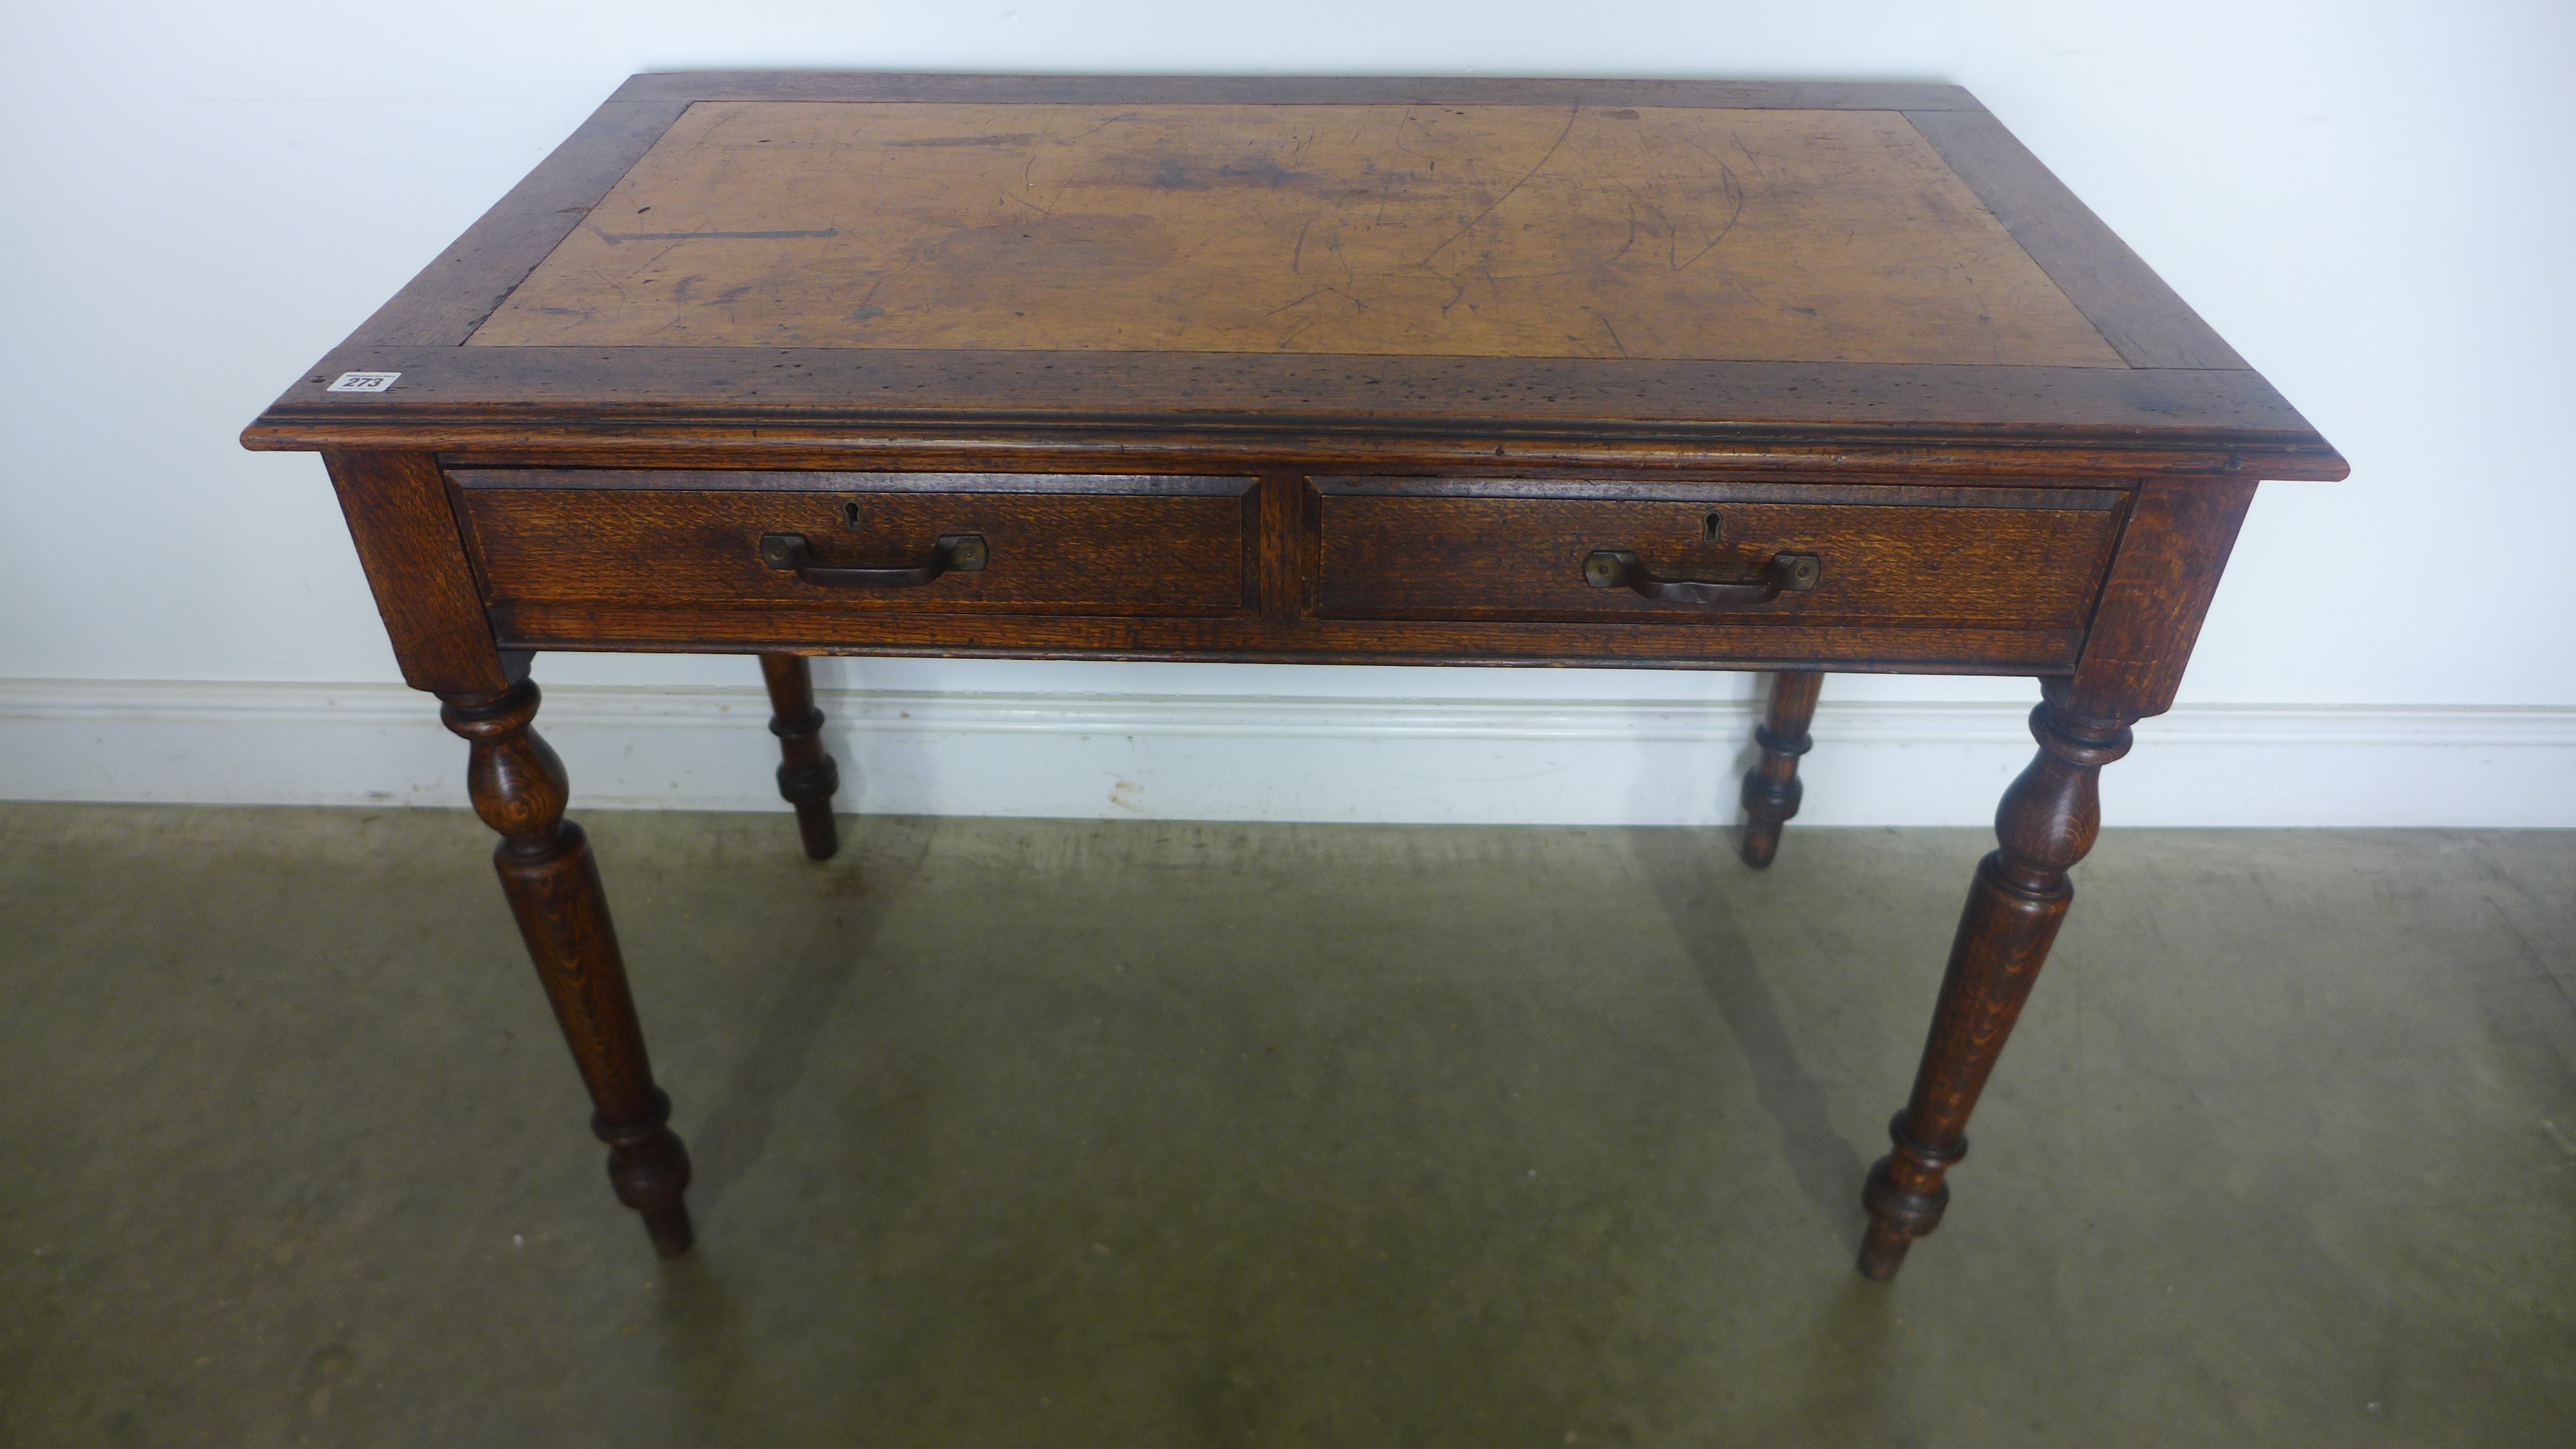 An early 20th century writing desk with two drawers - Width 107cm